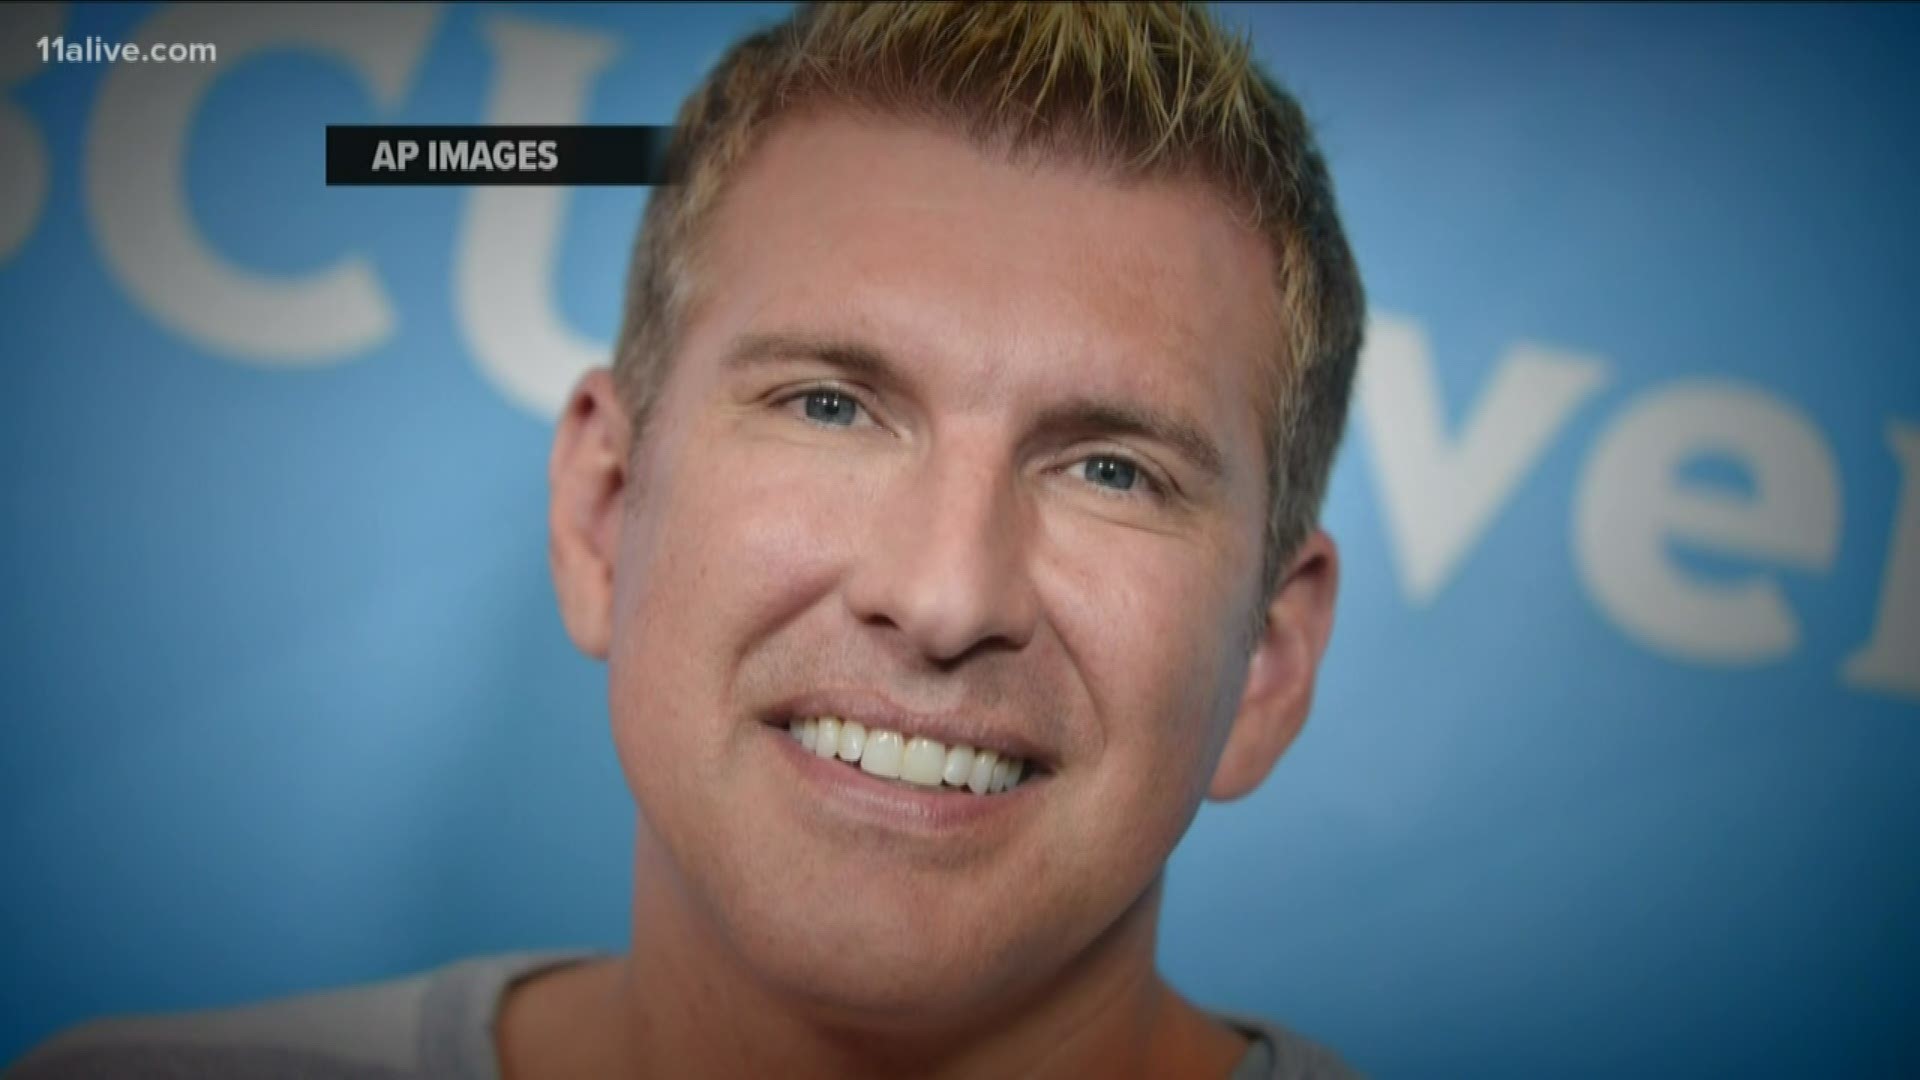 Todd Chrisley said their family will continue to stand strong in their faith.